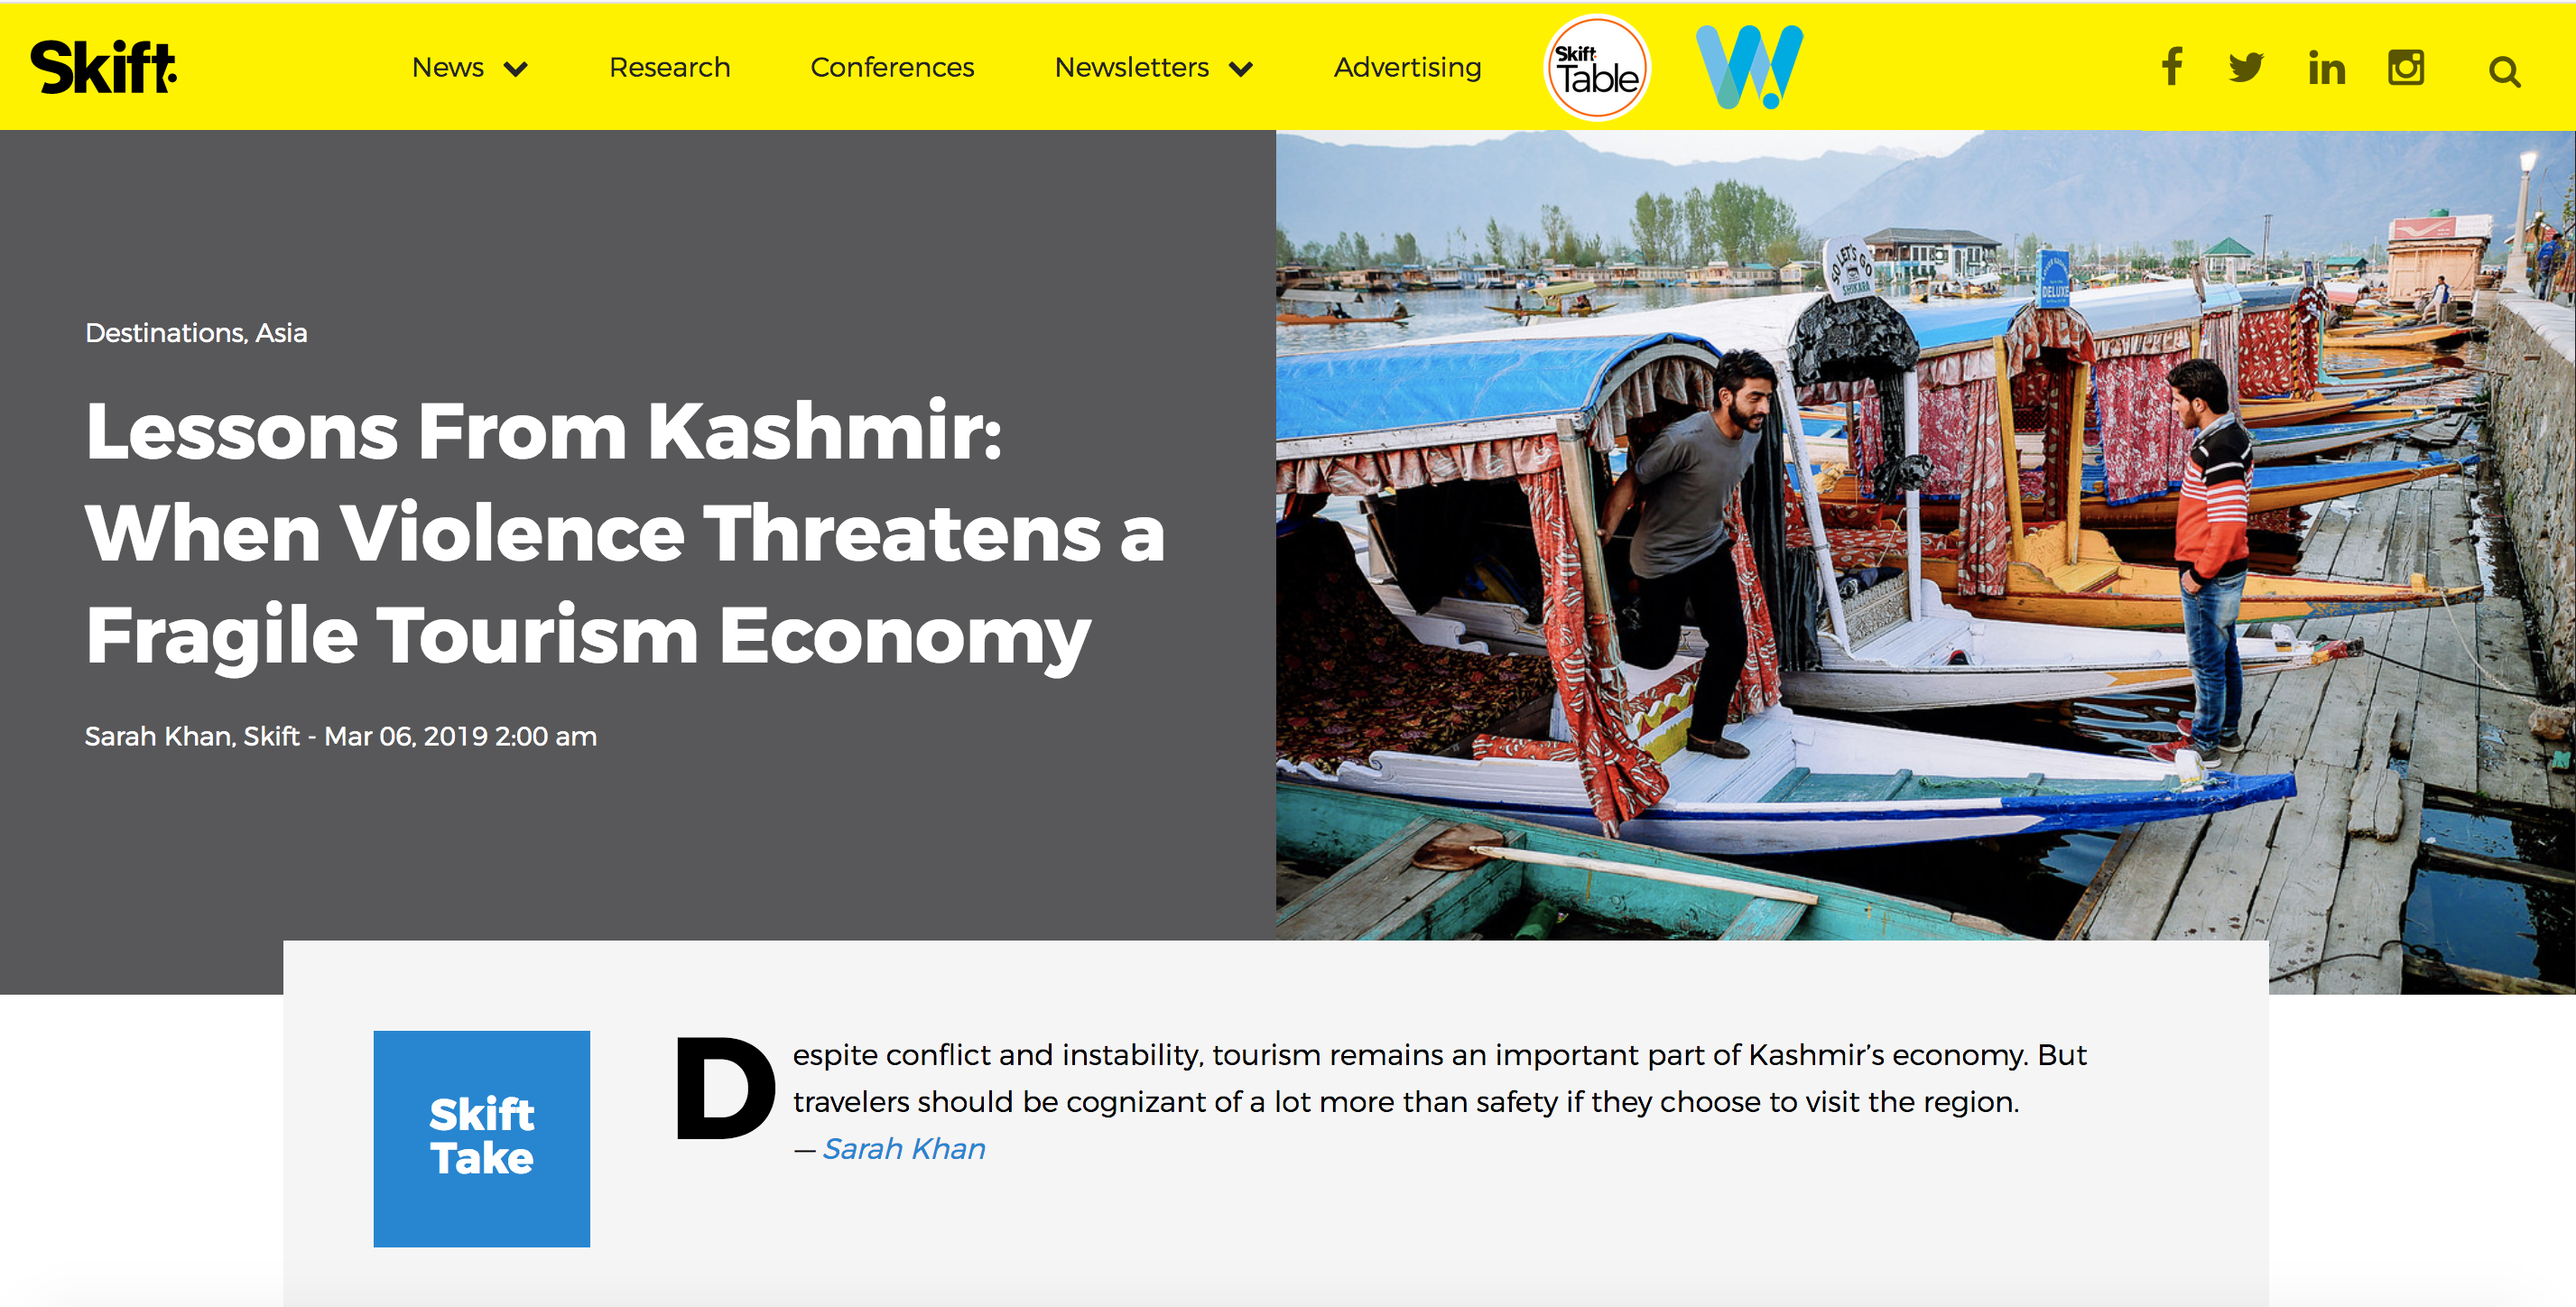 Skift: Lessons From Kashmir – When Violence Threatens a Fragile Tourism Economy